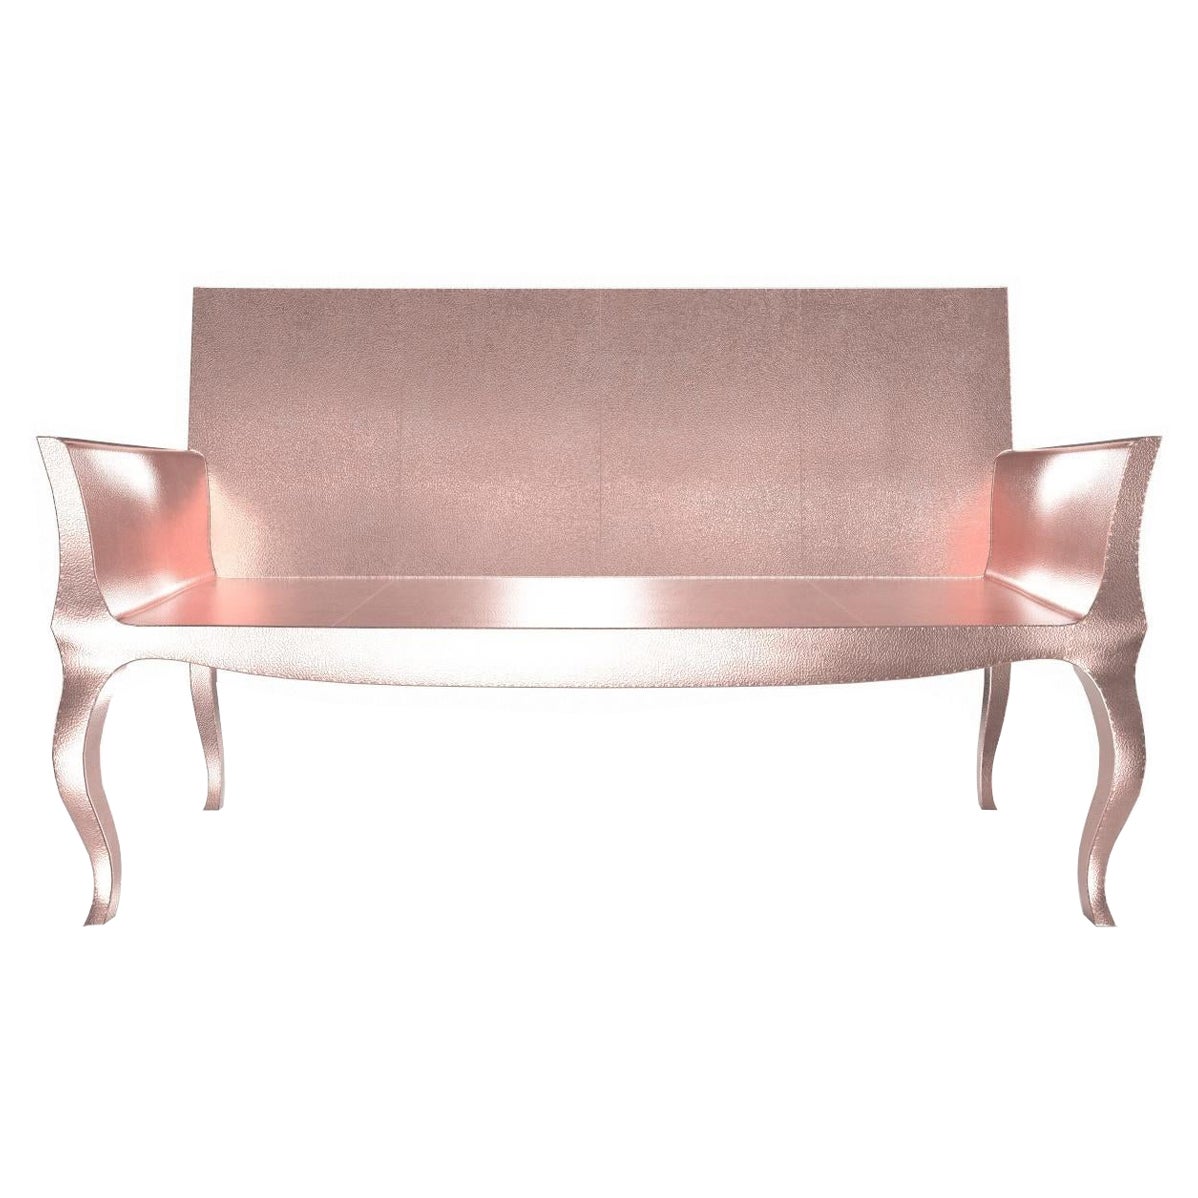 Louise Settee Art Deco Benches in Fine Hammered Copper by Paul Mathieu